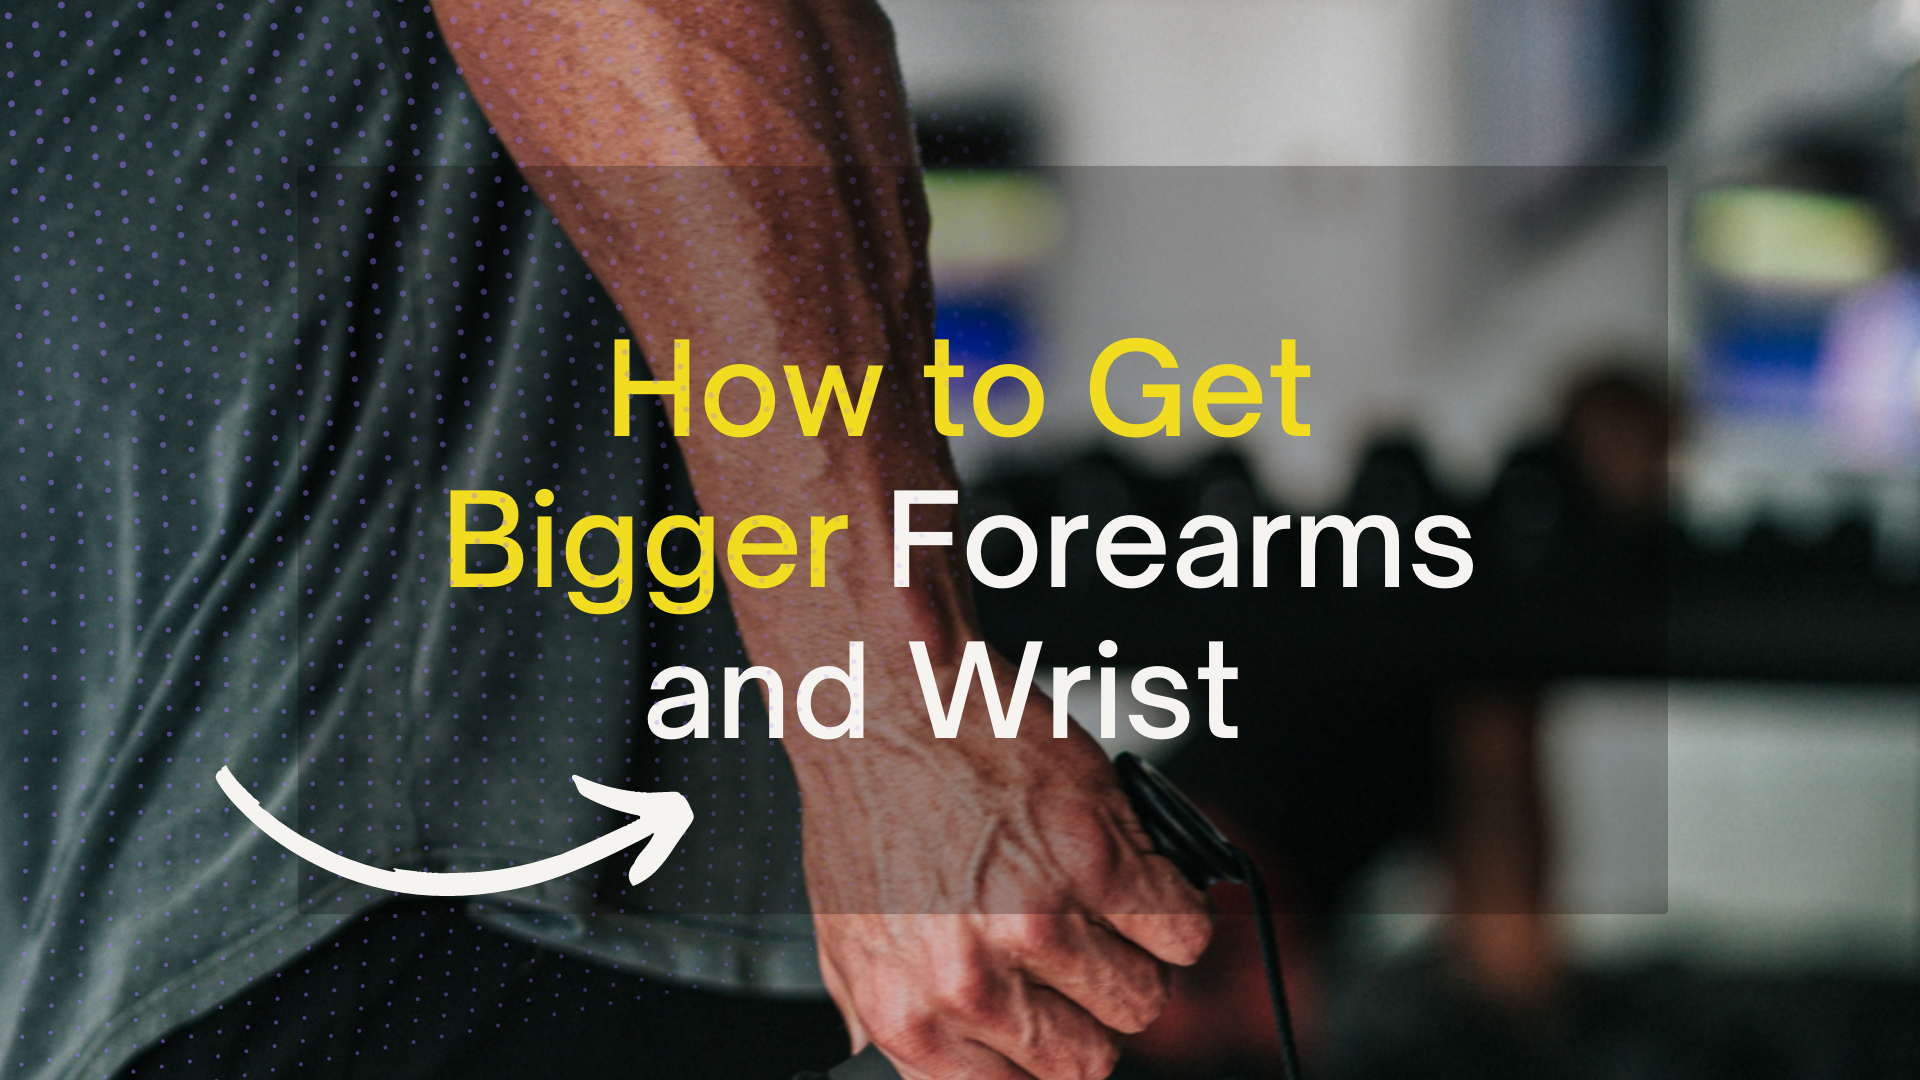 11 Tips How to Get Bigger Forearms and Wrist